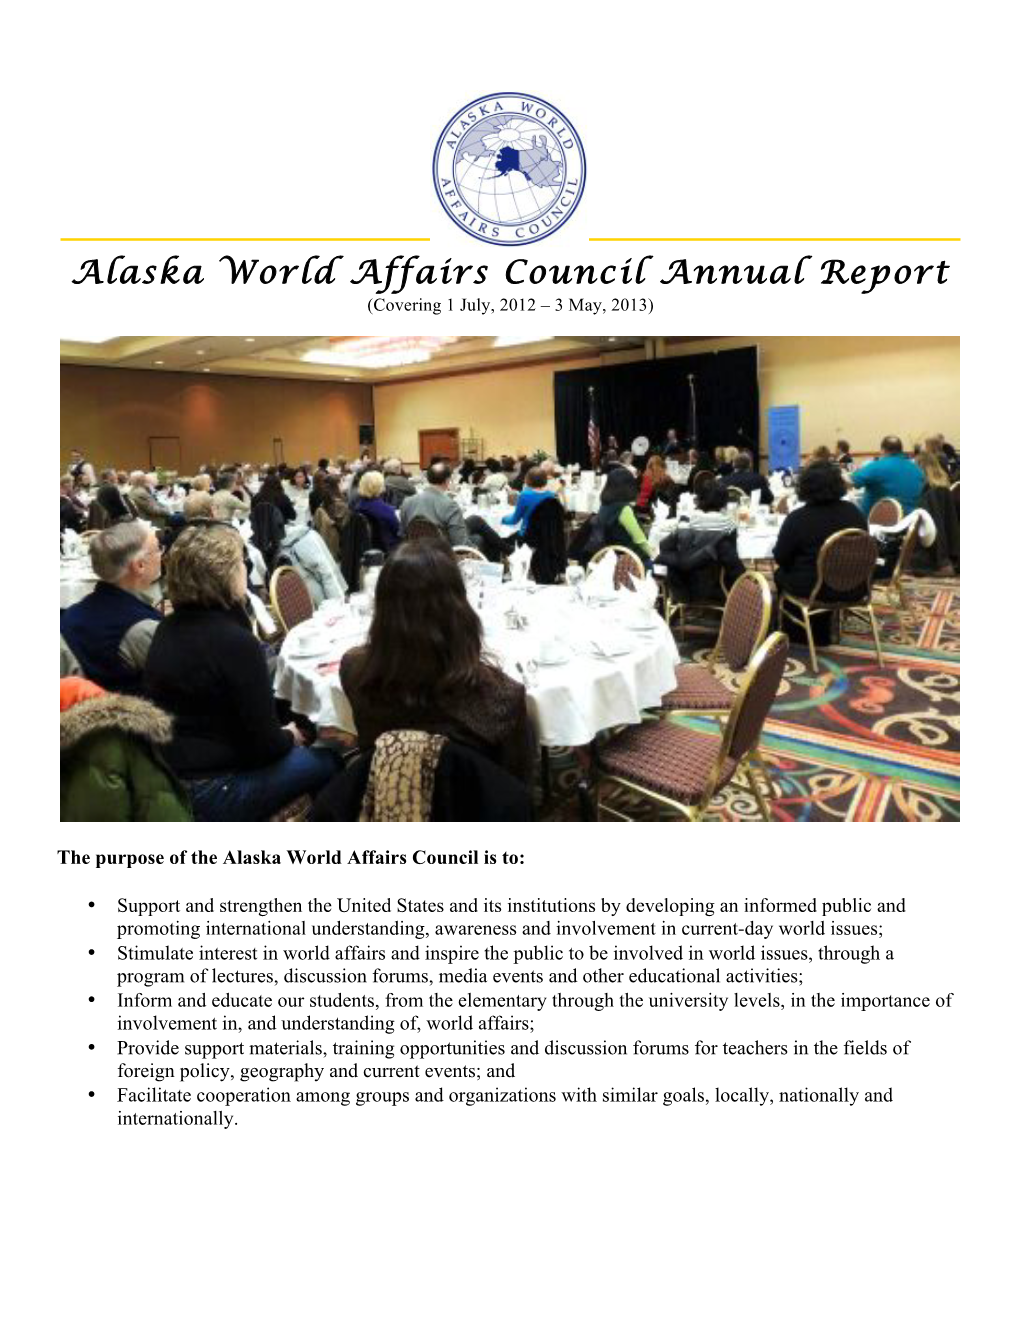 Alaska World Affairs Council Annual Report (Covering 1 July, 2012 – 3 May, 2013)